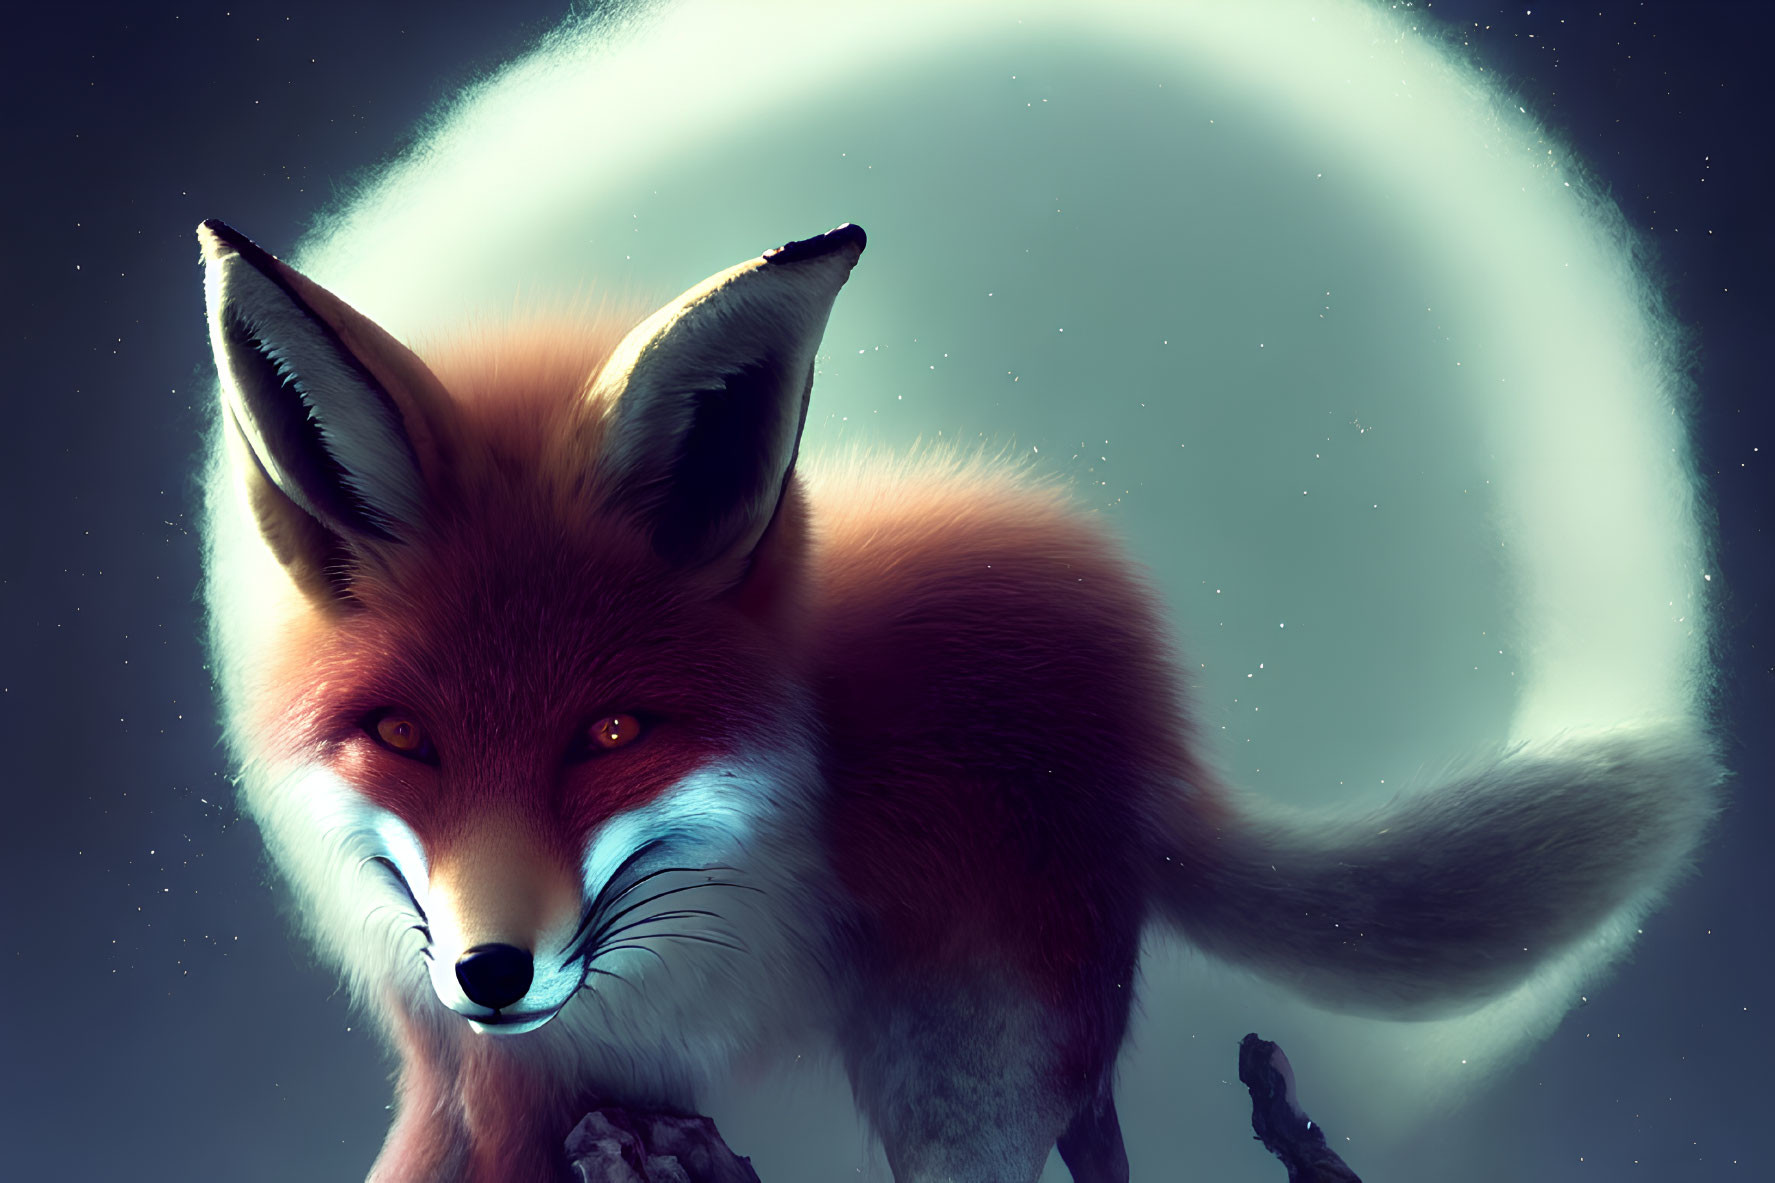 Red Fox with Blue Eyes in Nocturnal Moonlit Scene